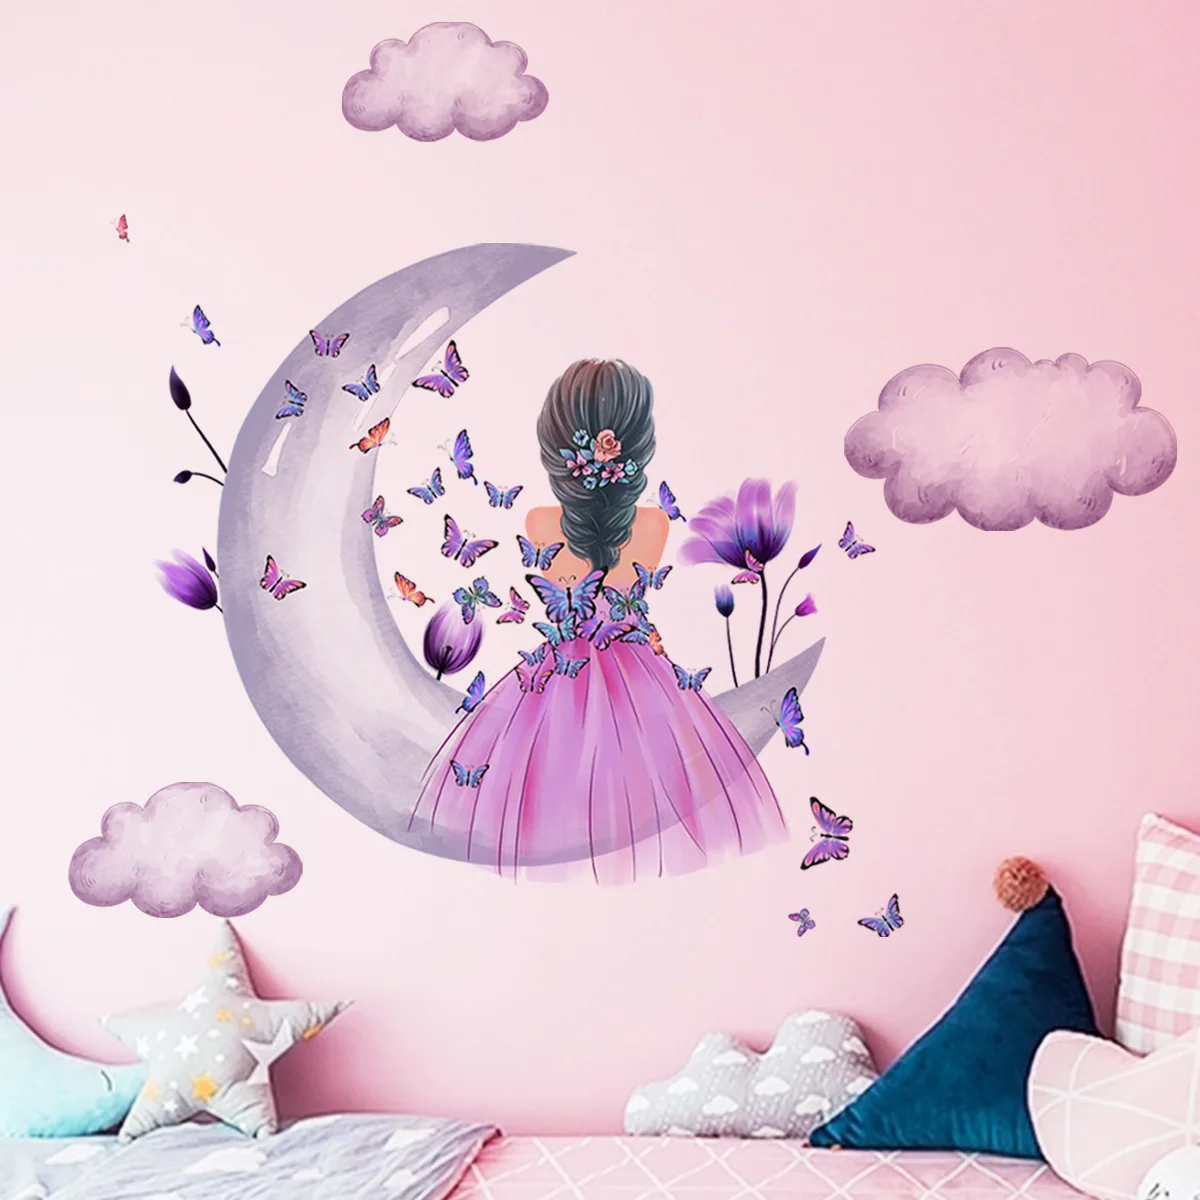 Butterfly Little Girl Gray Moon Clouds Wall Stickers Removable Vinyl Home Decor Living Room Bedroom